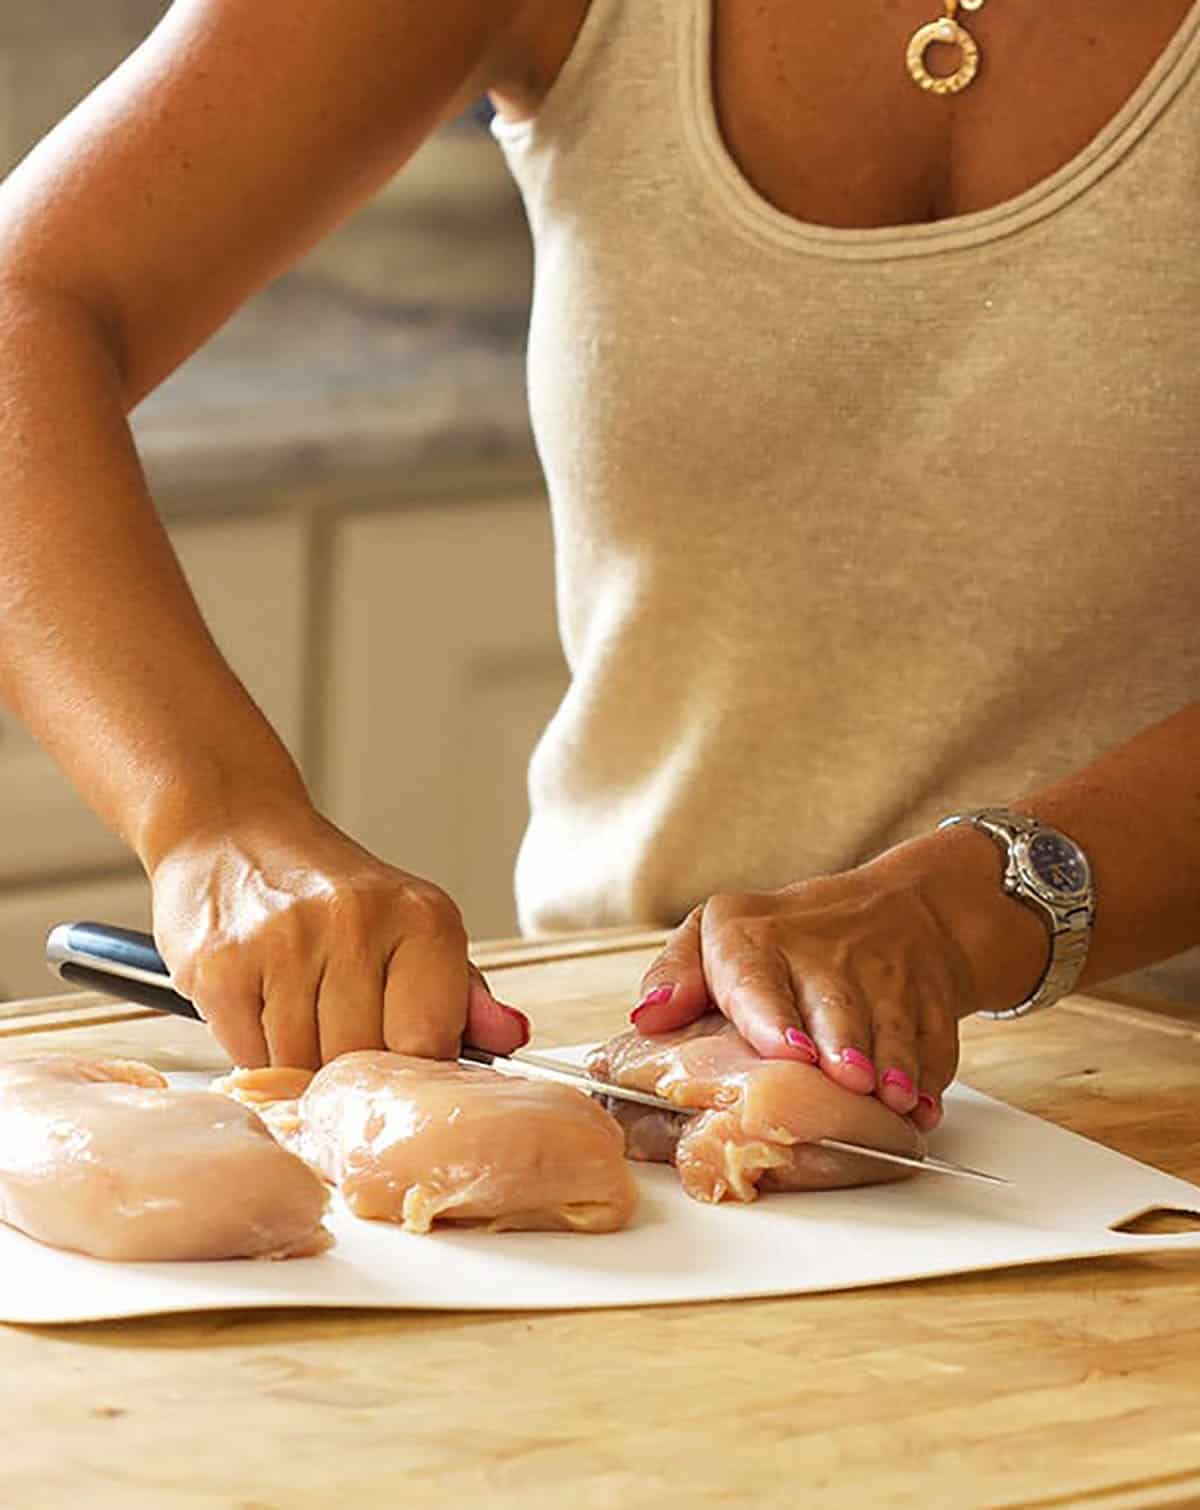 woman slicing chicken breast in half on a wooden countertop.